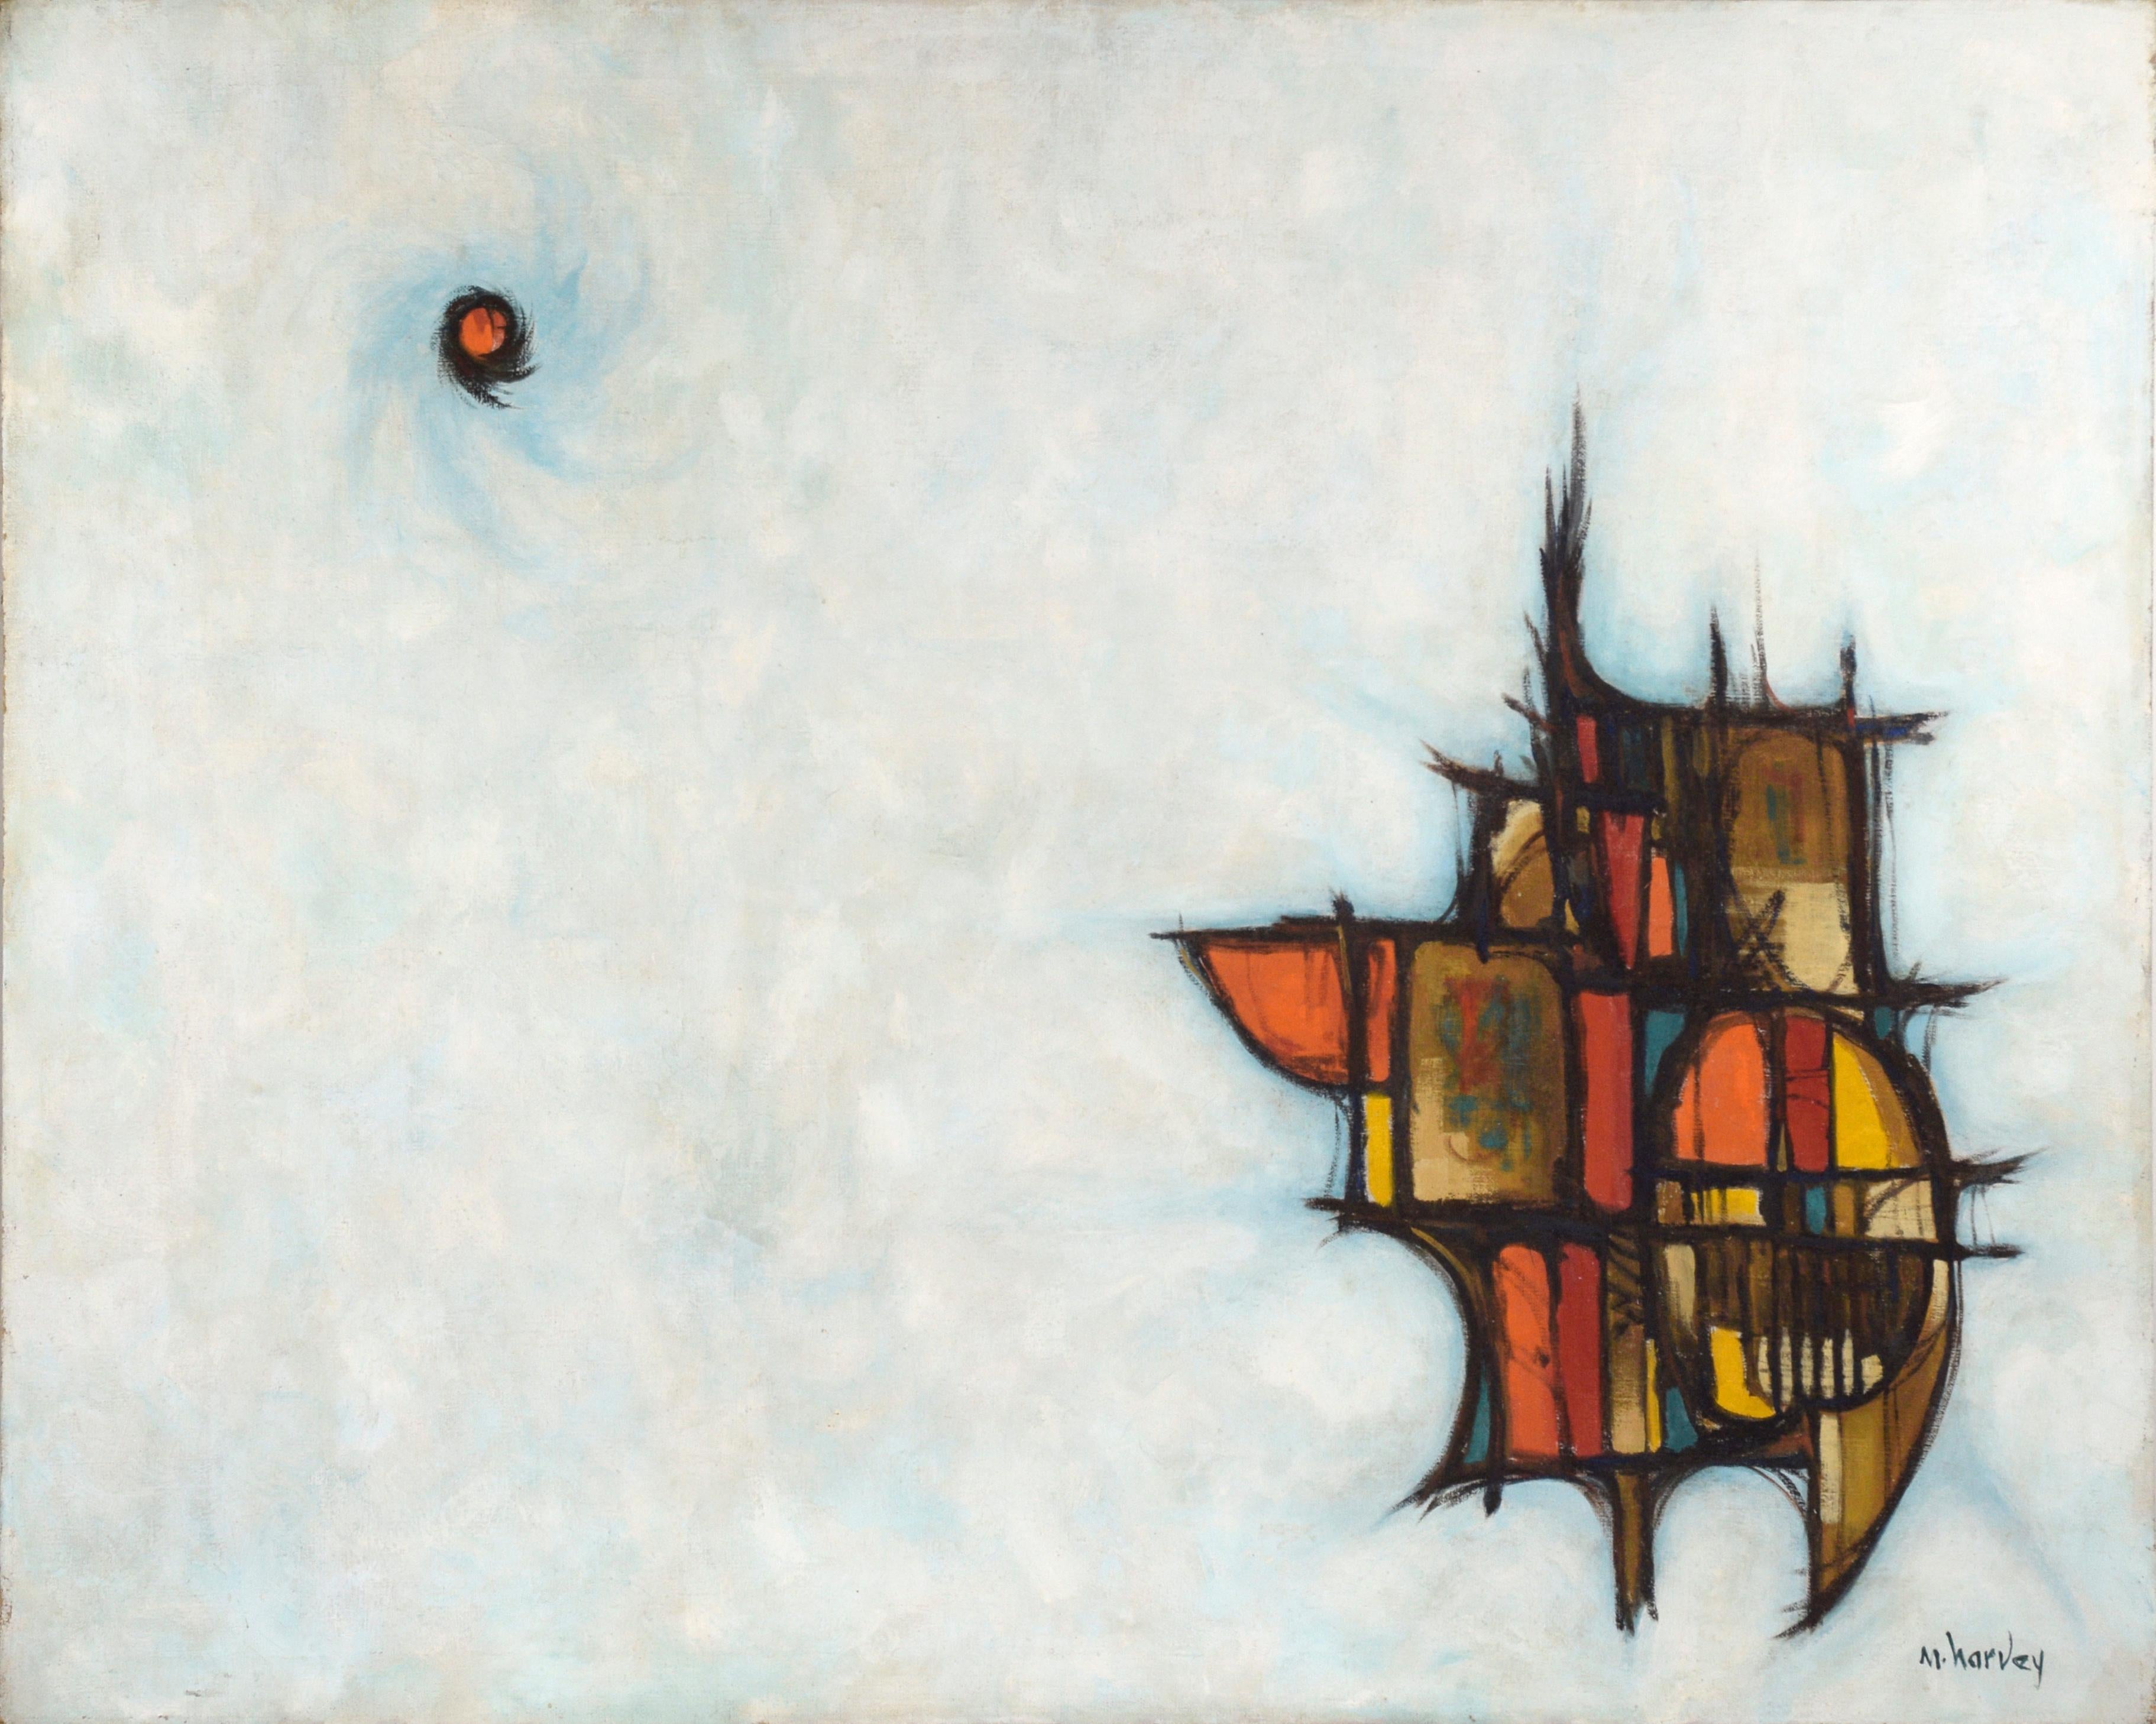 M Harvey Abstract Painting - Floating House in the Sky - Abstract Composition